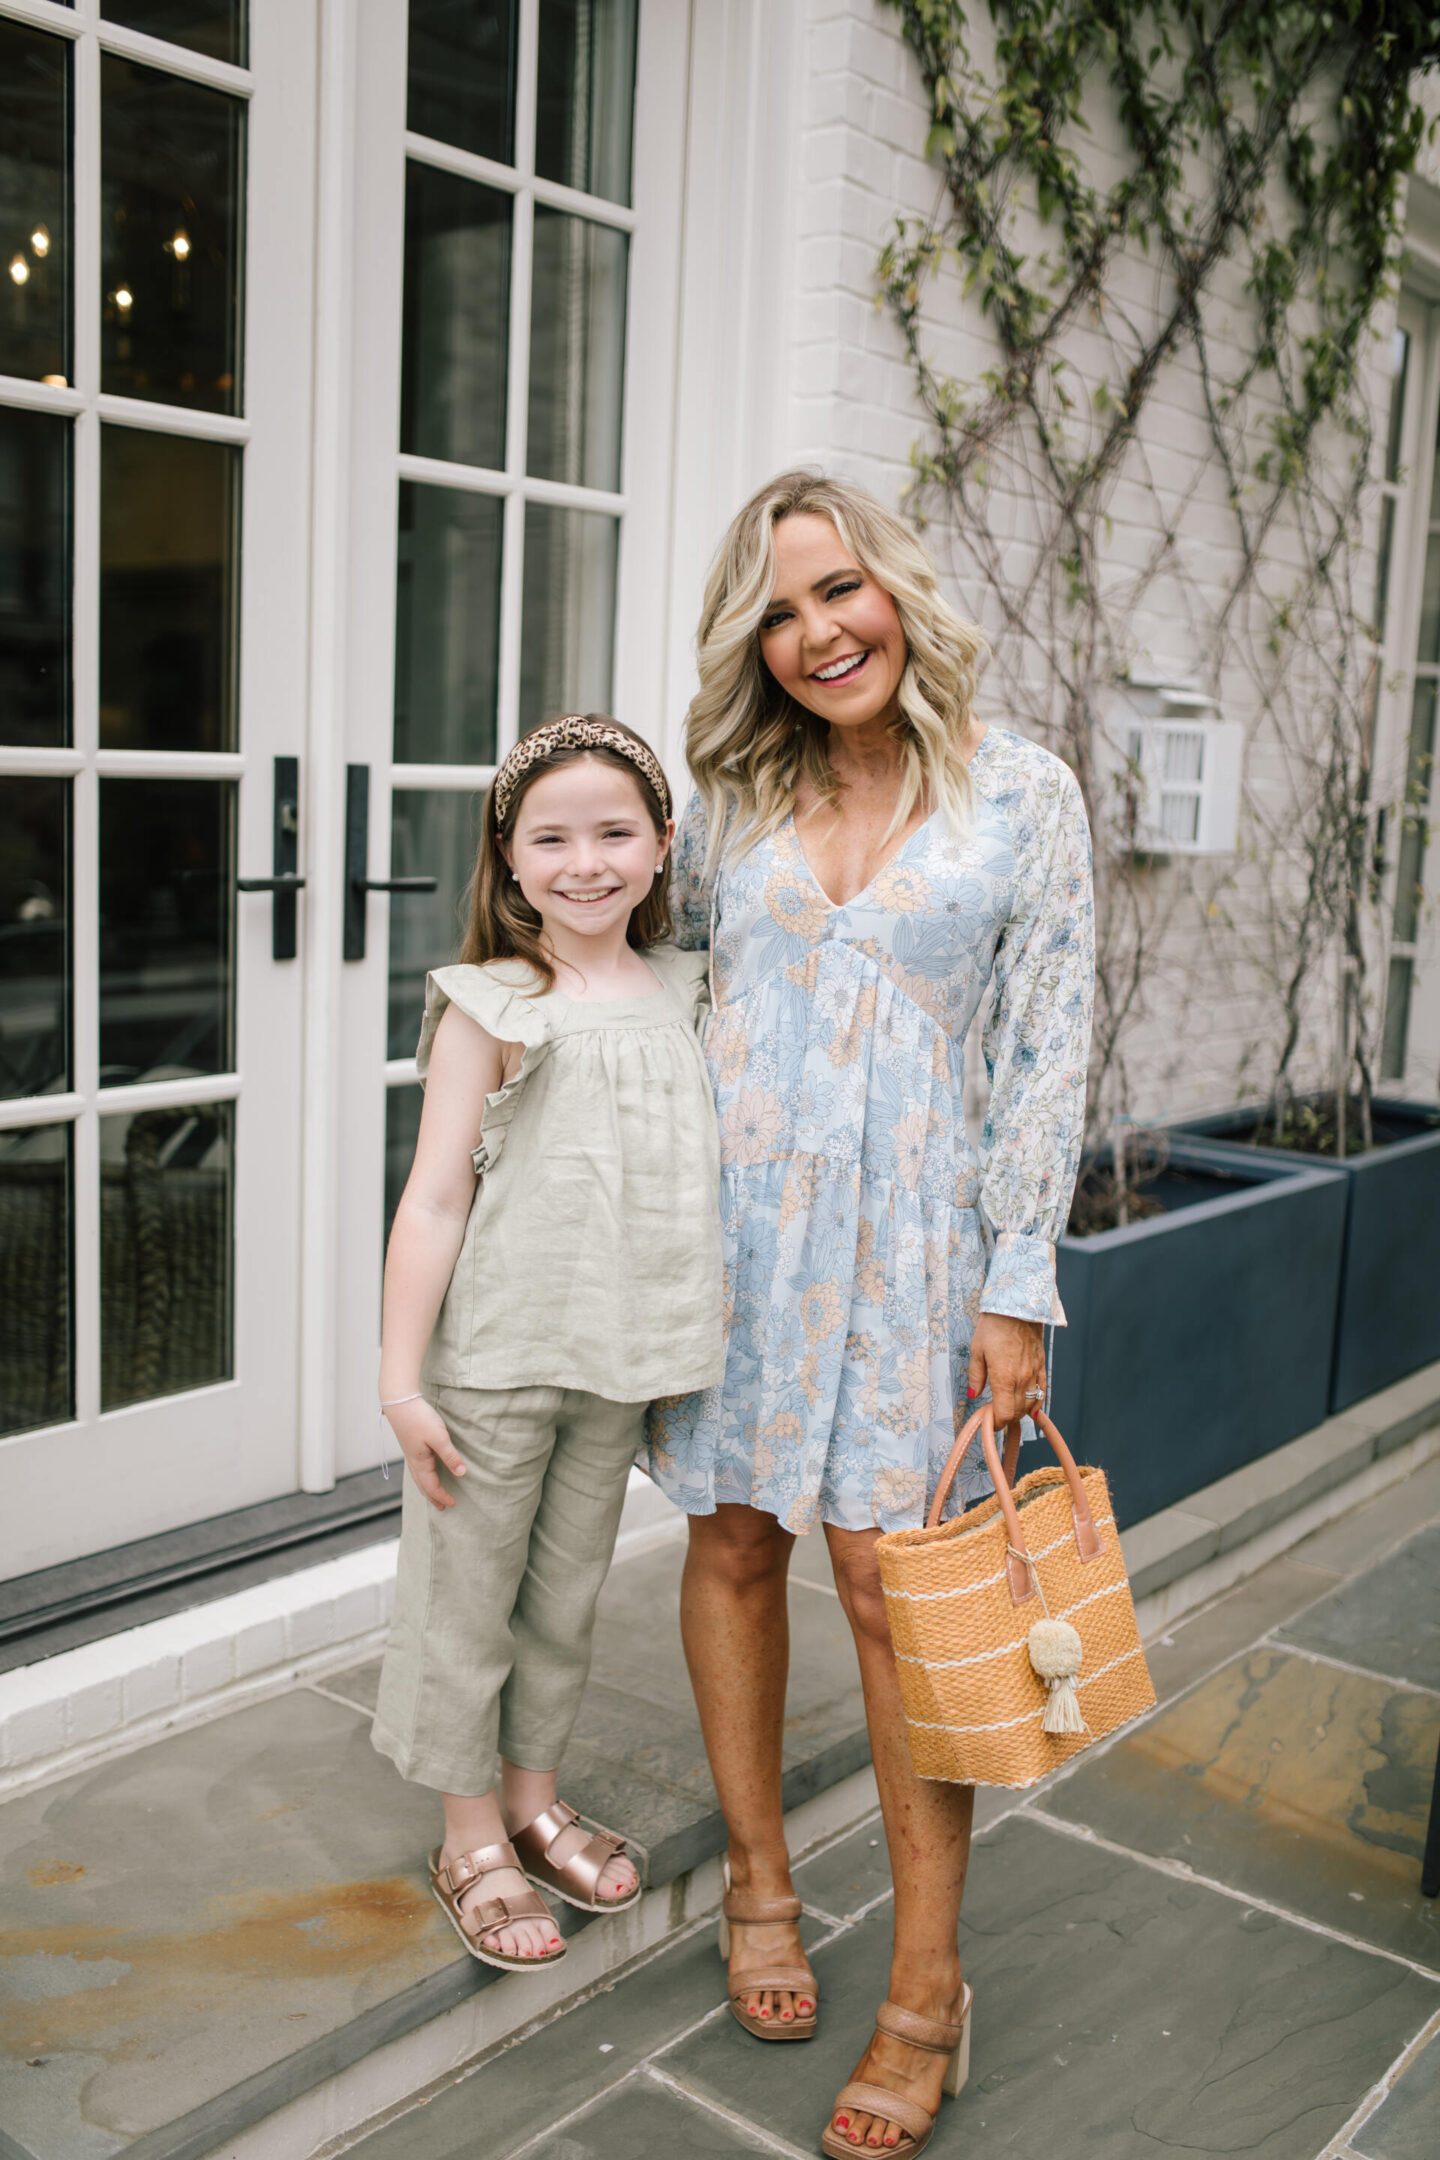 jcrew mommy and me favorites featured by Hello Happiness